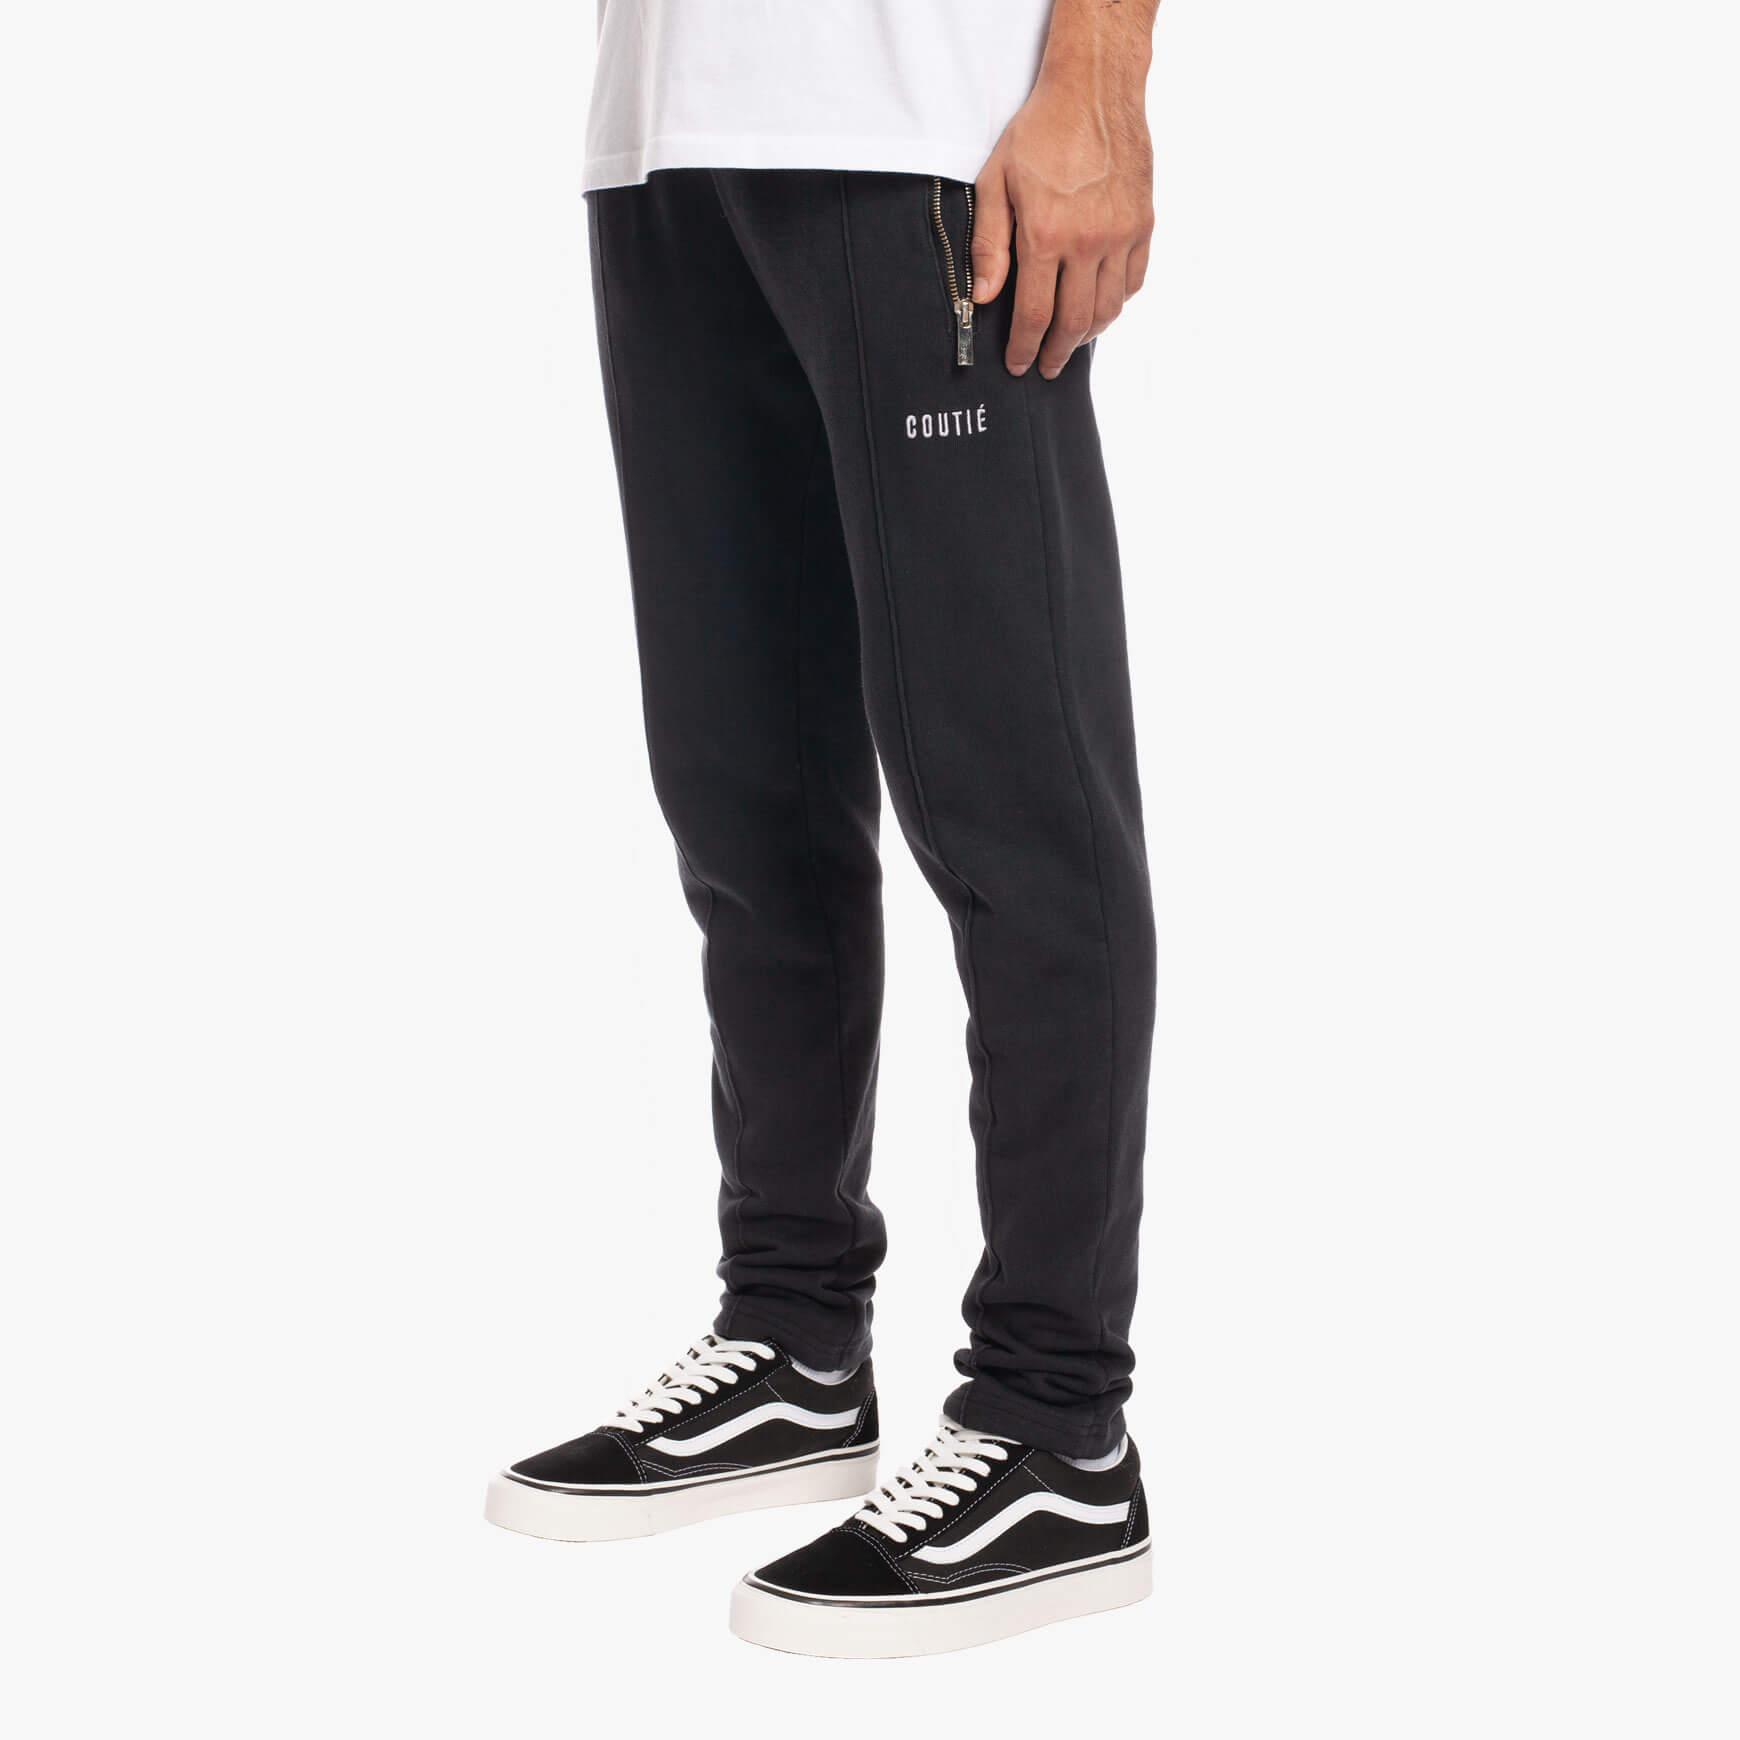 Pleated Sweat Pant Washed Black